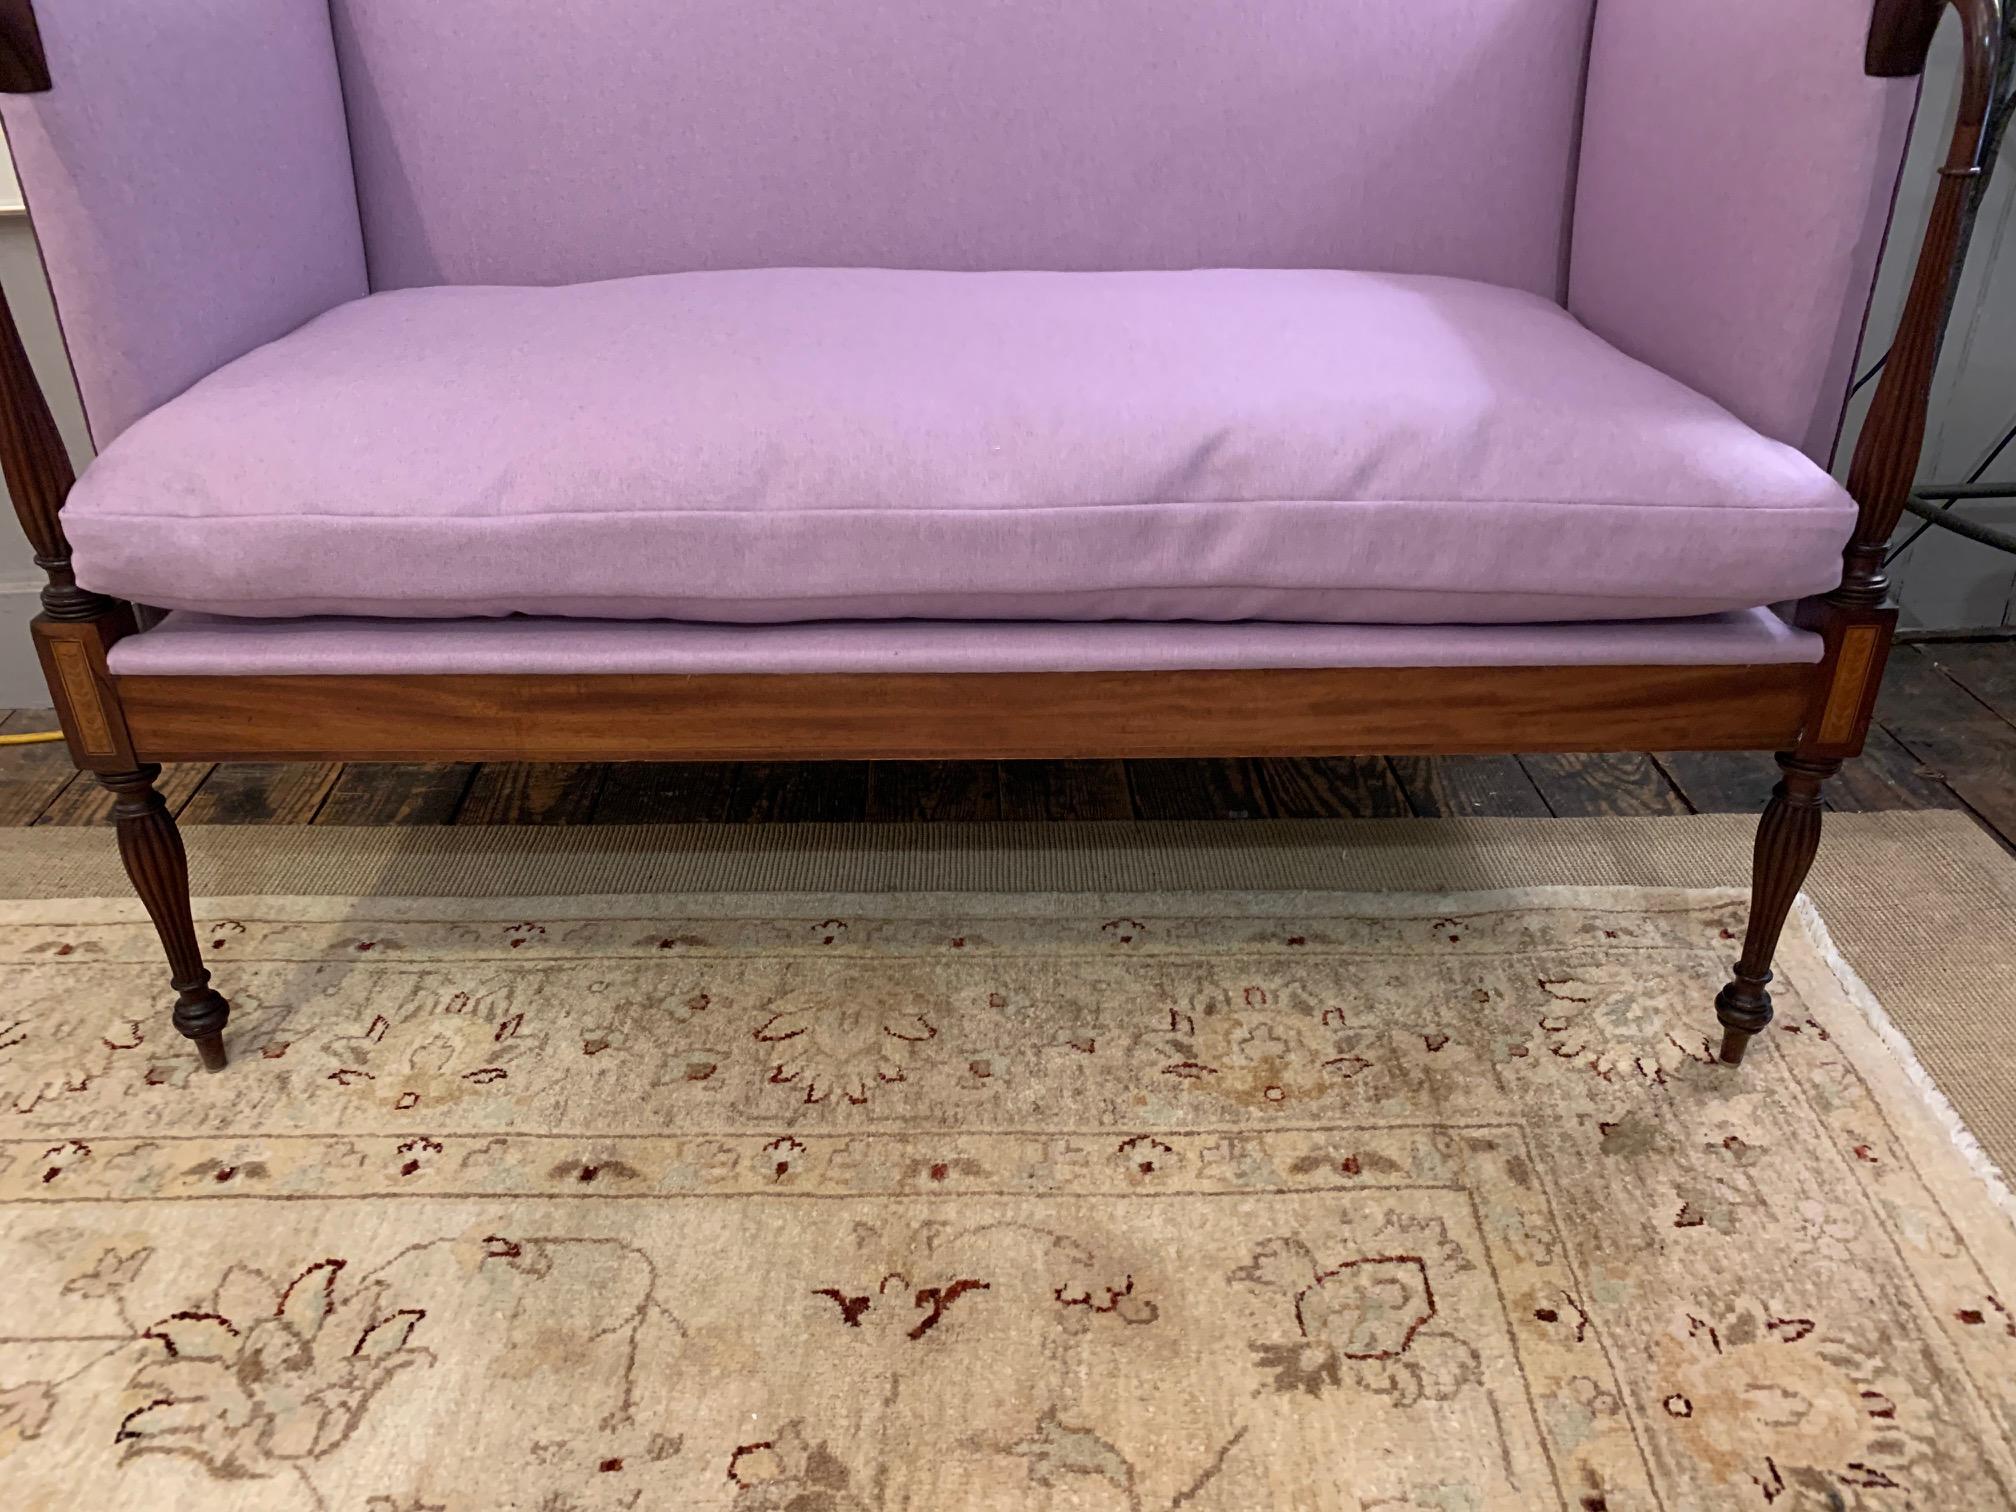 Early 20th Century Dreamy Federal Style Mahogany and Lavender Antique Settee Loveseat